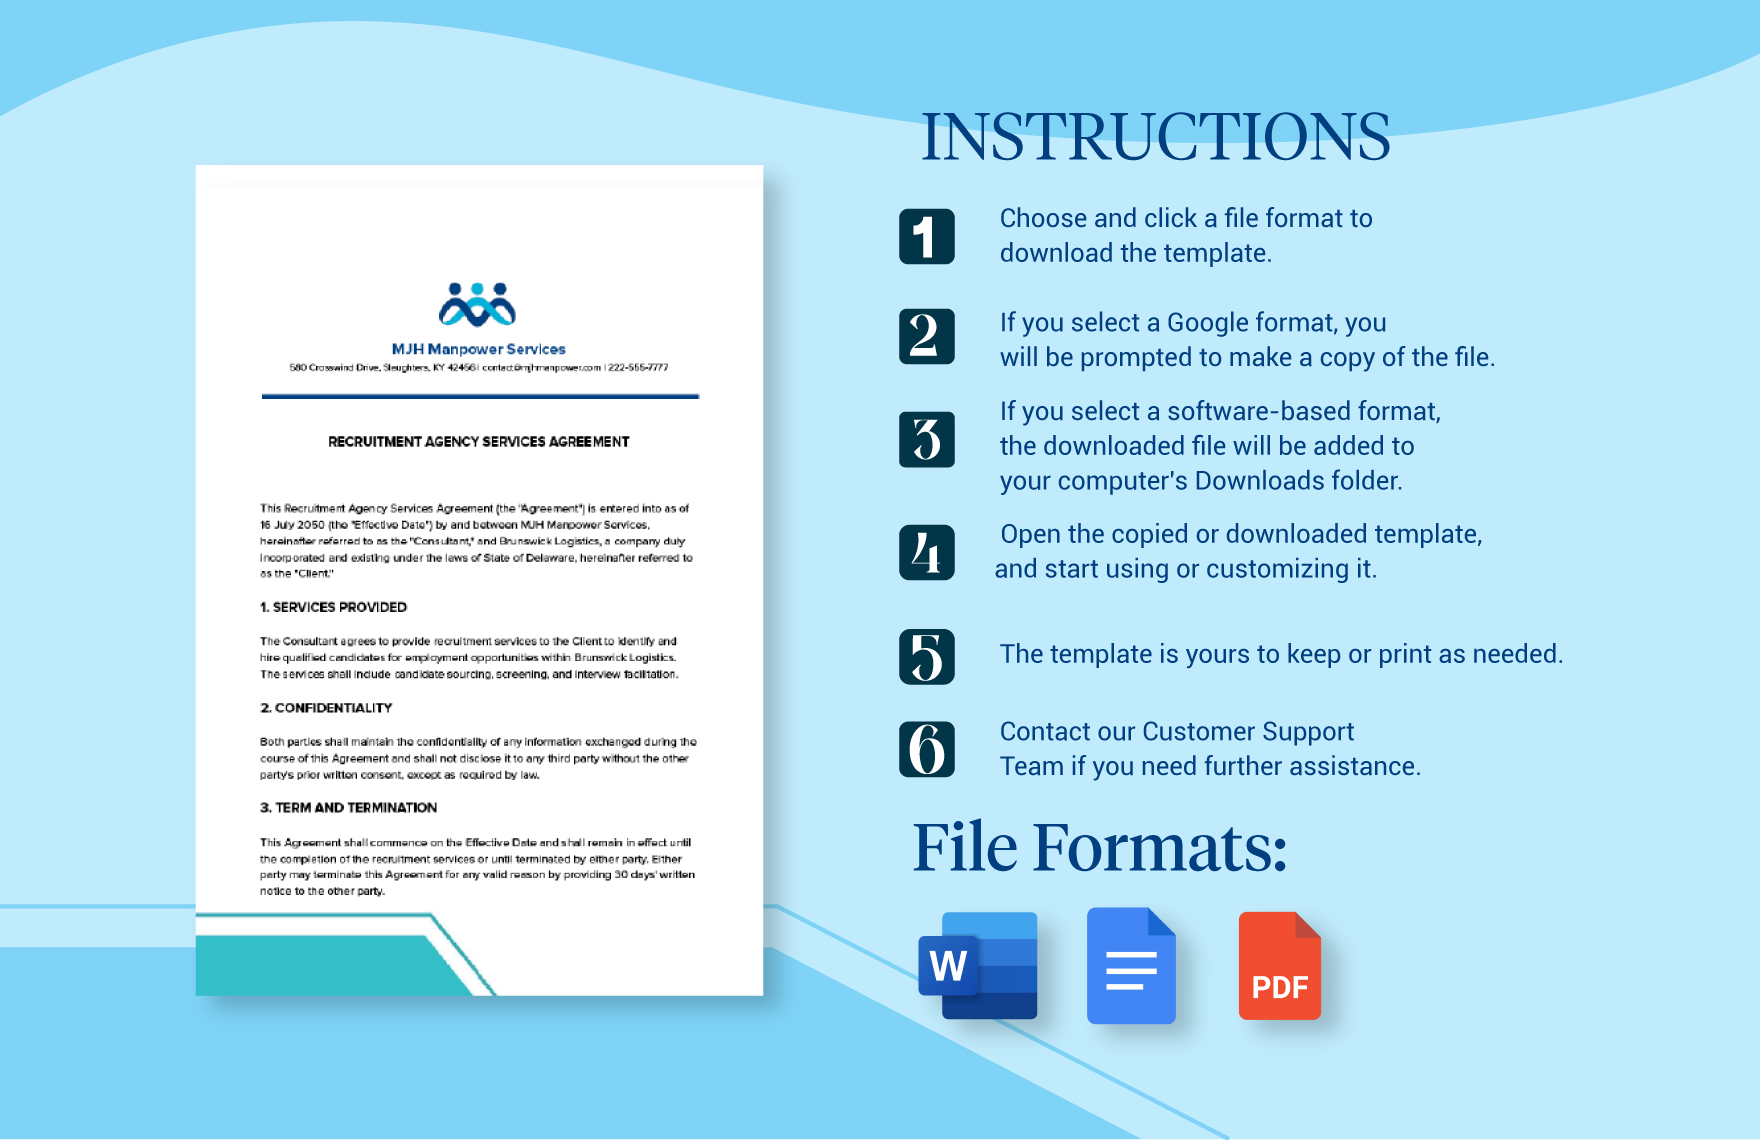 Consultant Client Recruitment Agency Agreement Template